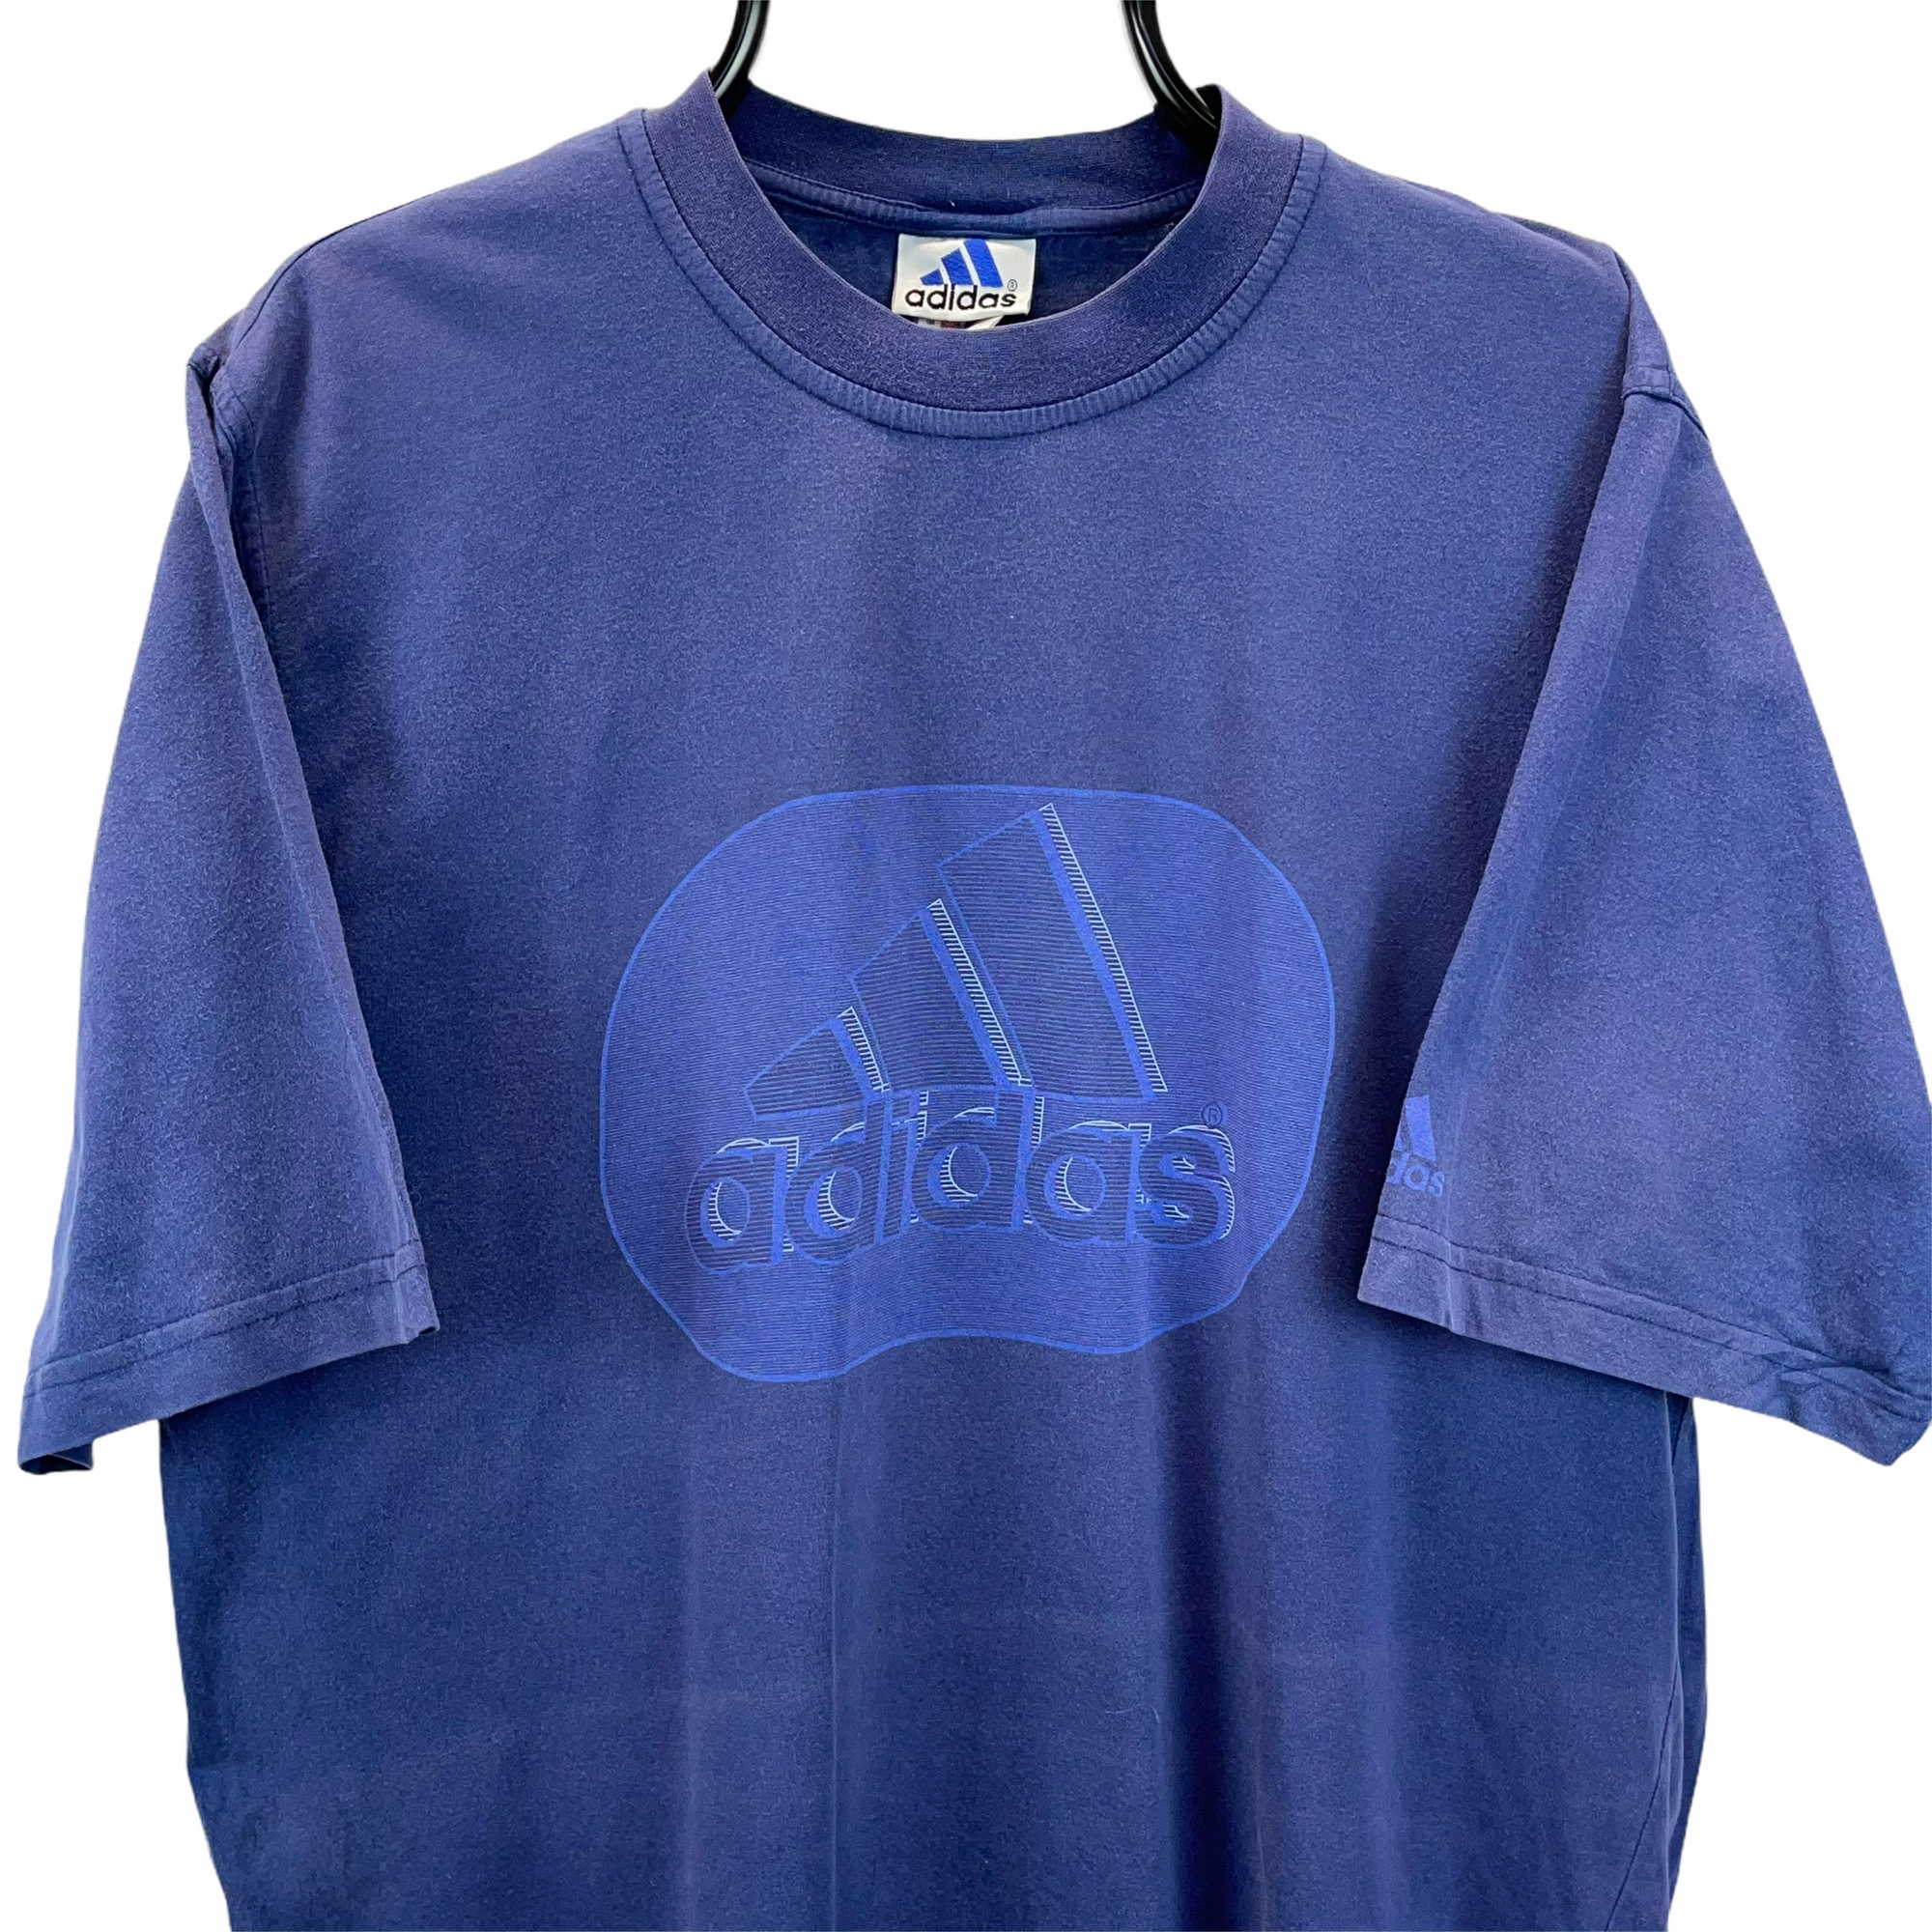 Vintage 90s Adidas Spellout Tee in Navy - Men's Large/Women's XL